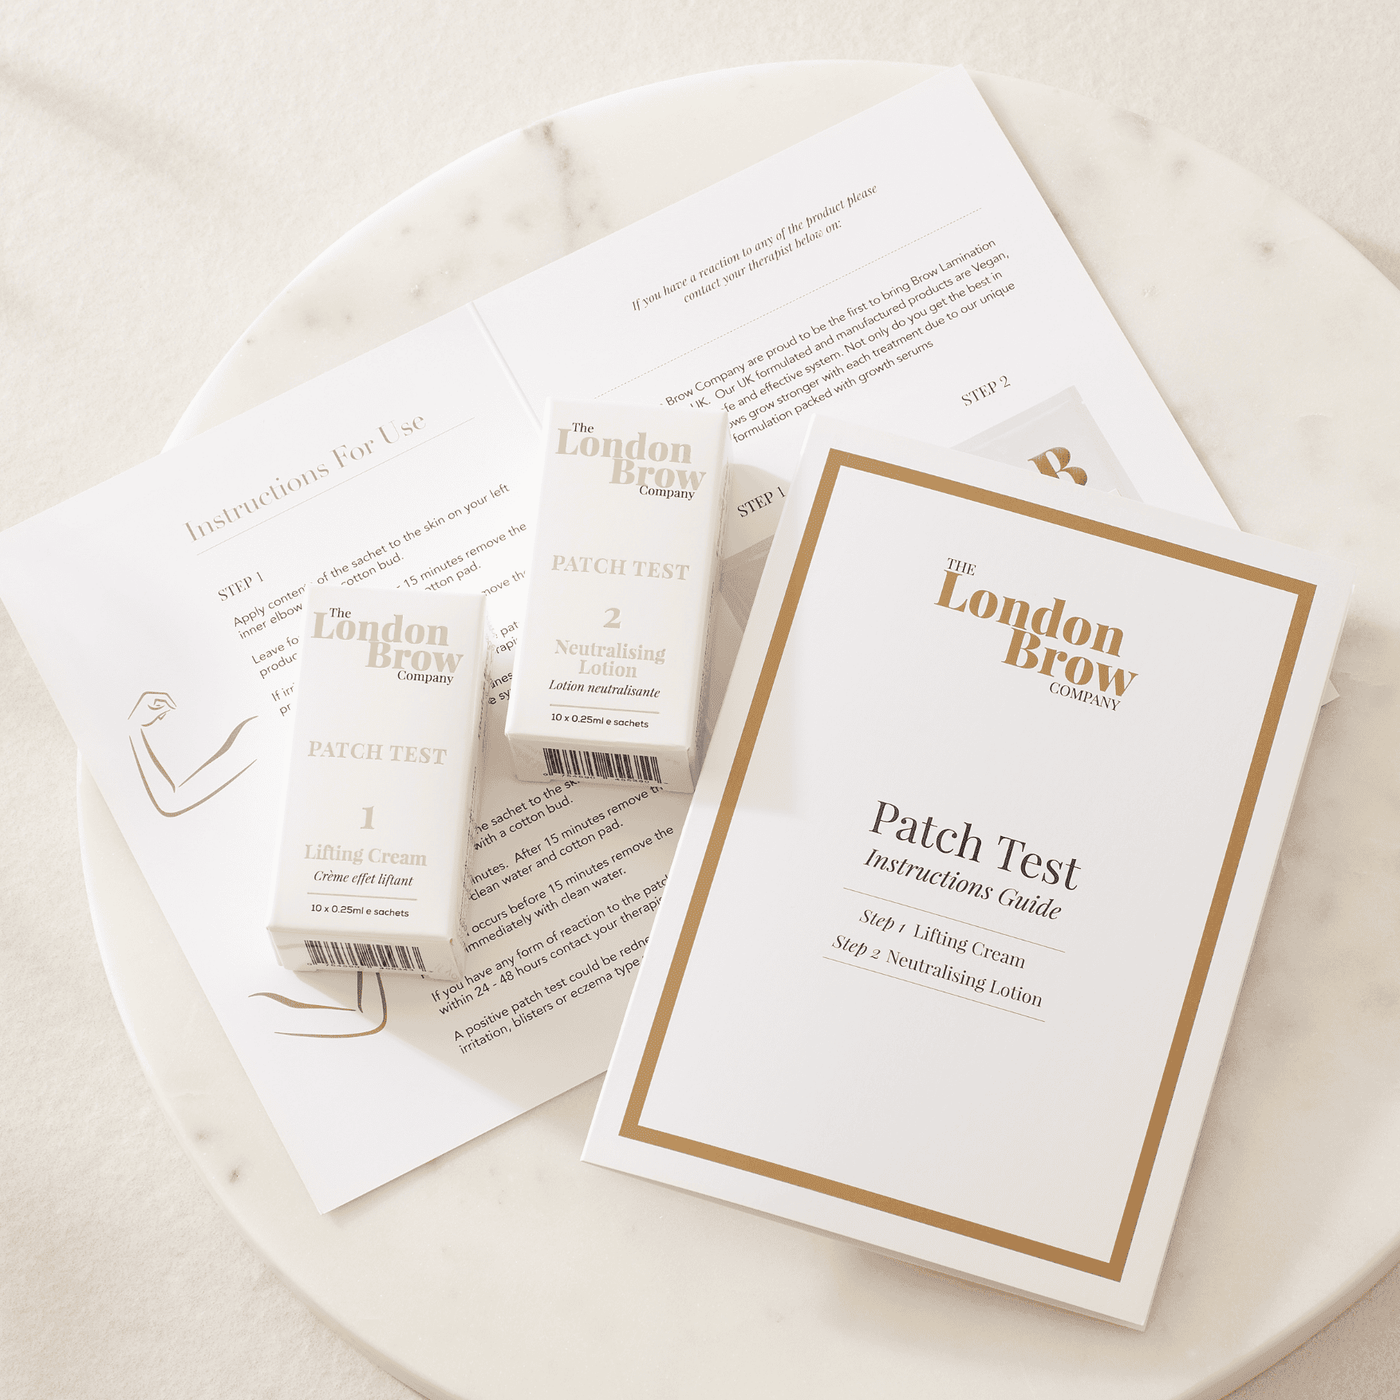 Patch Test Sachets with Client Patch Test Cards - Brow Lamination - The London Brow Company